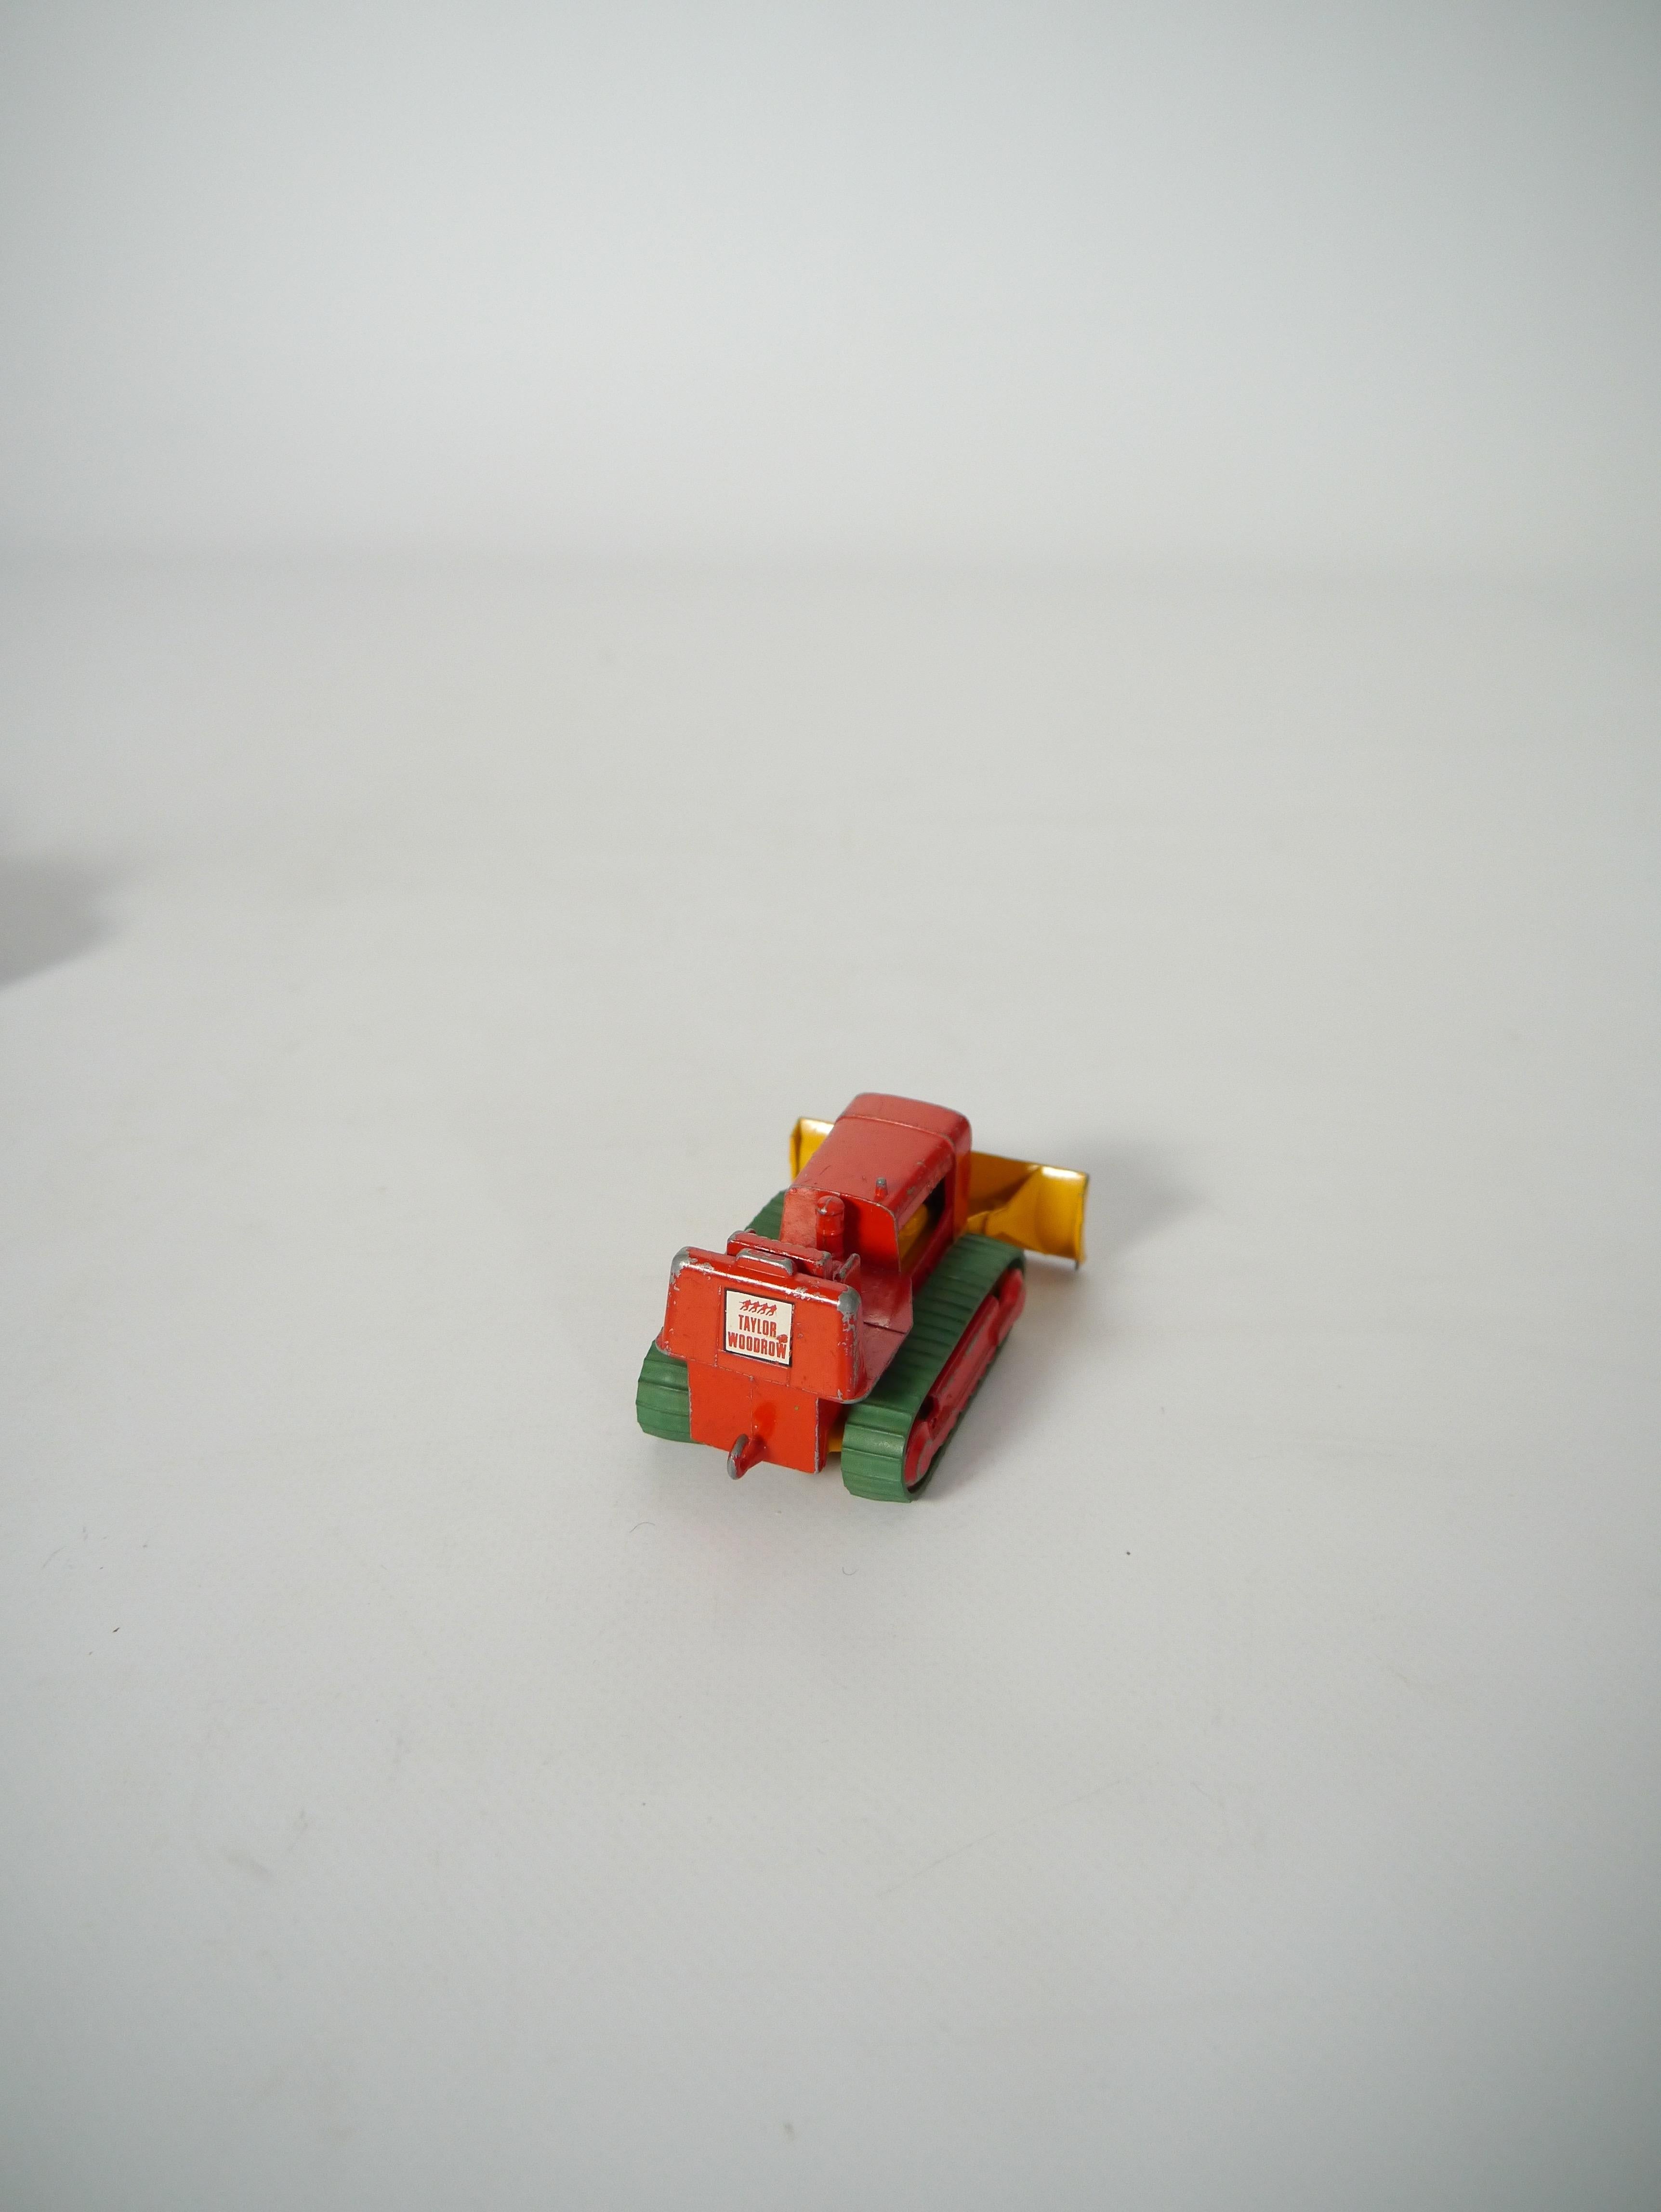 Three Matchbox Toy Construction Machines by Lesney, England, 1960-70s For Sale 1